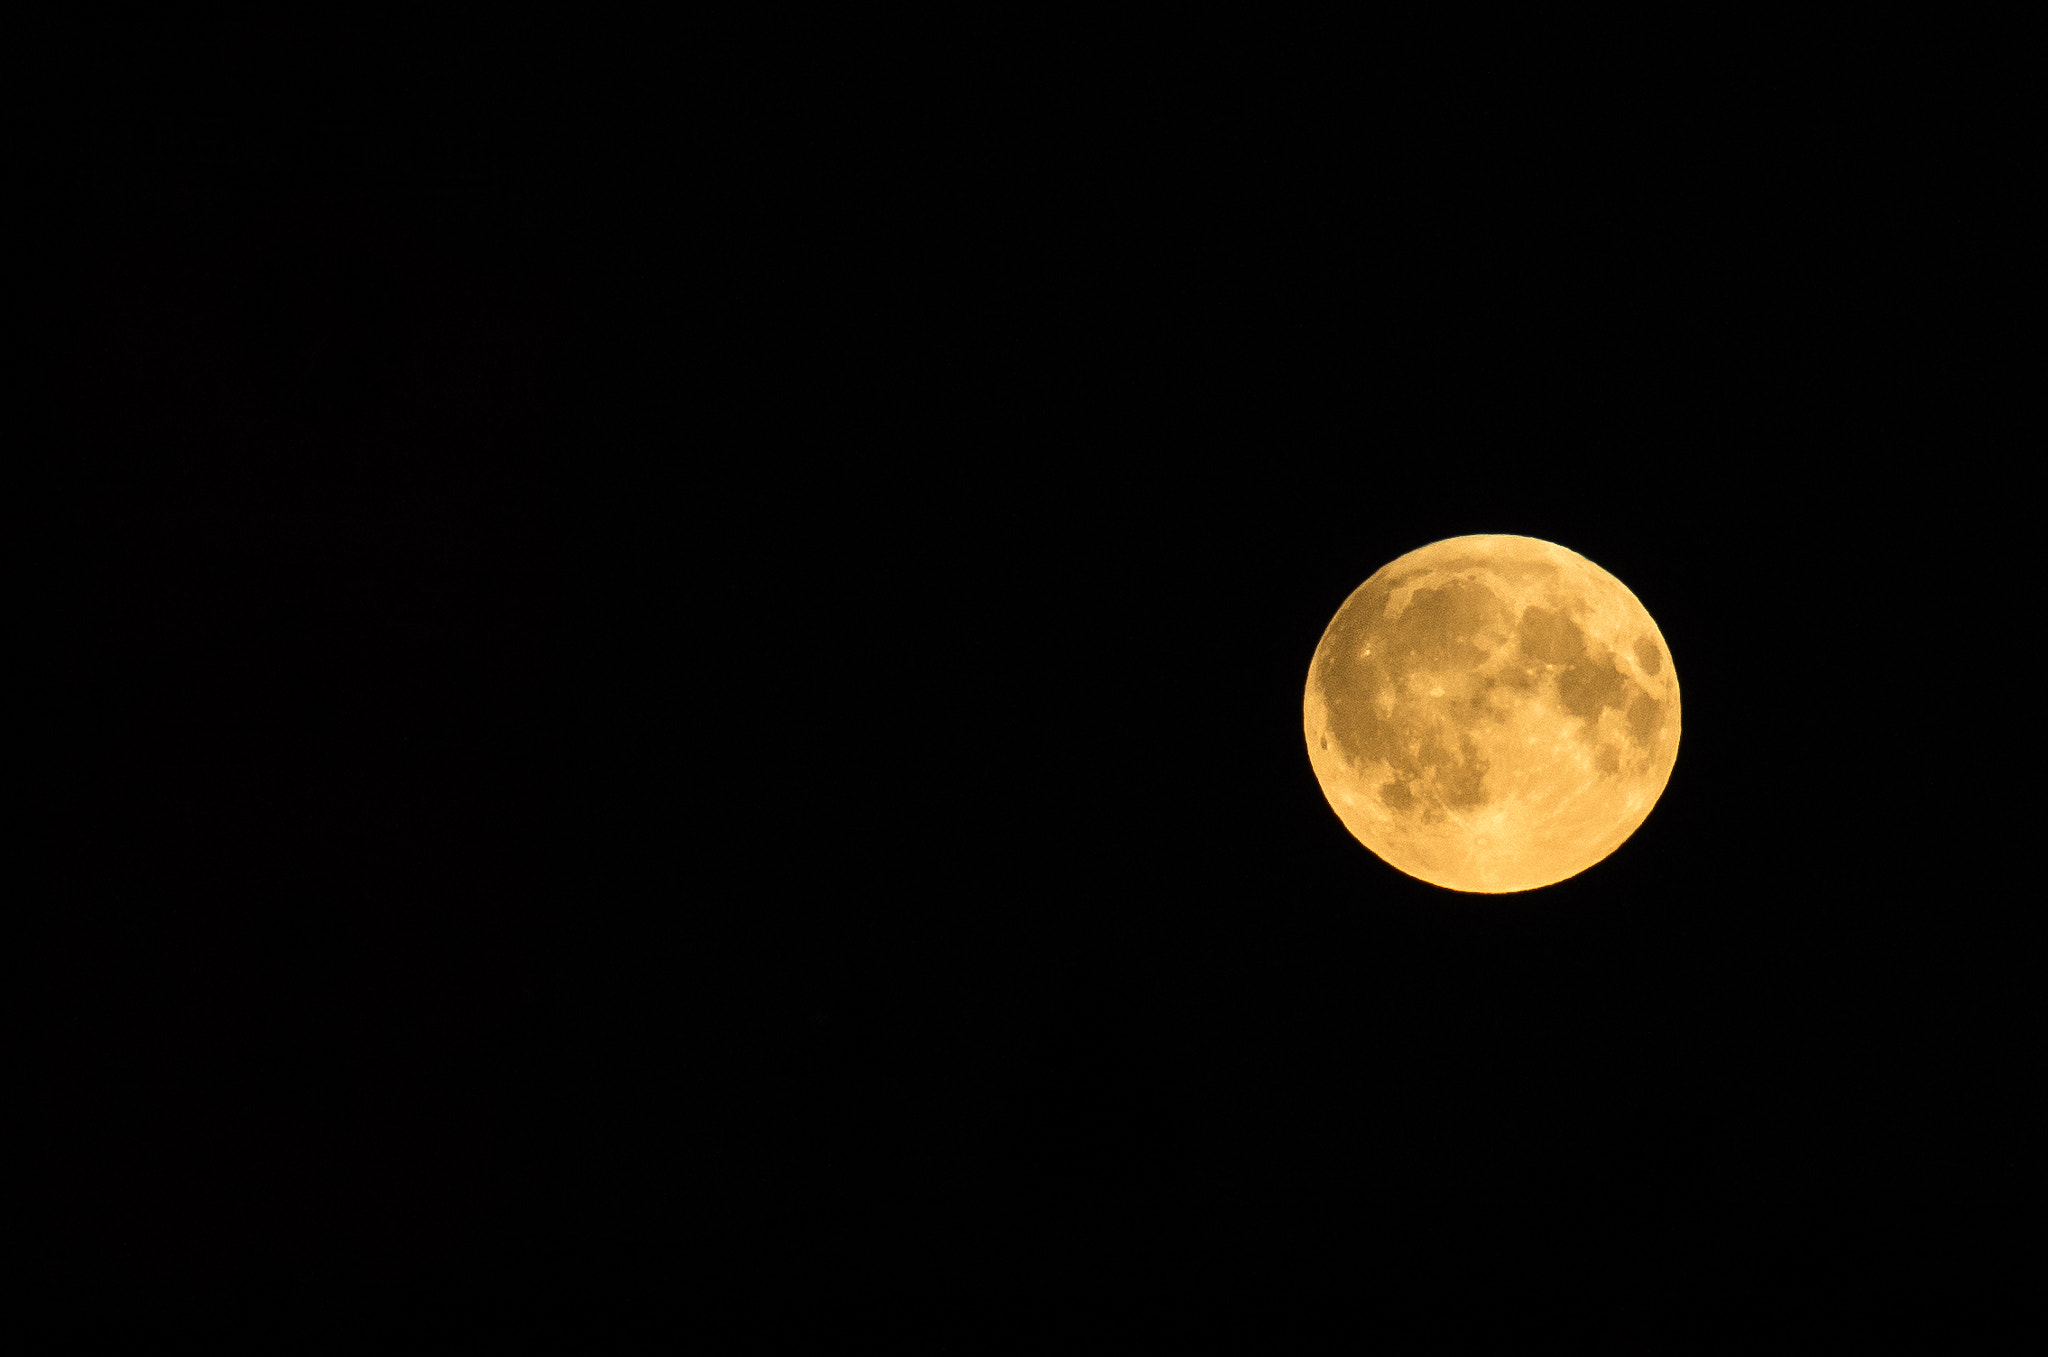 Pentax K-500 sample photo. The fullest moon of the year photography